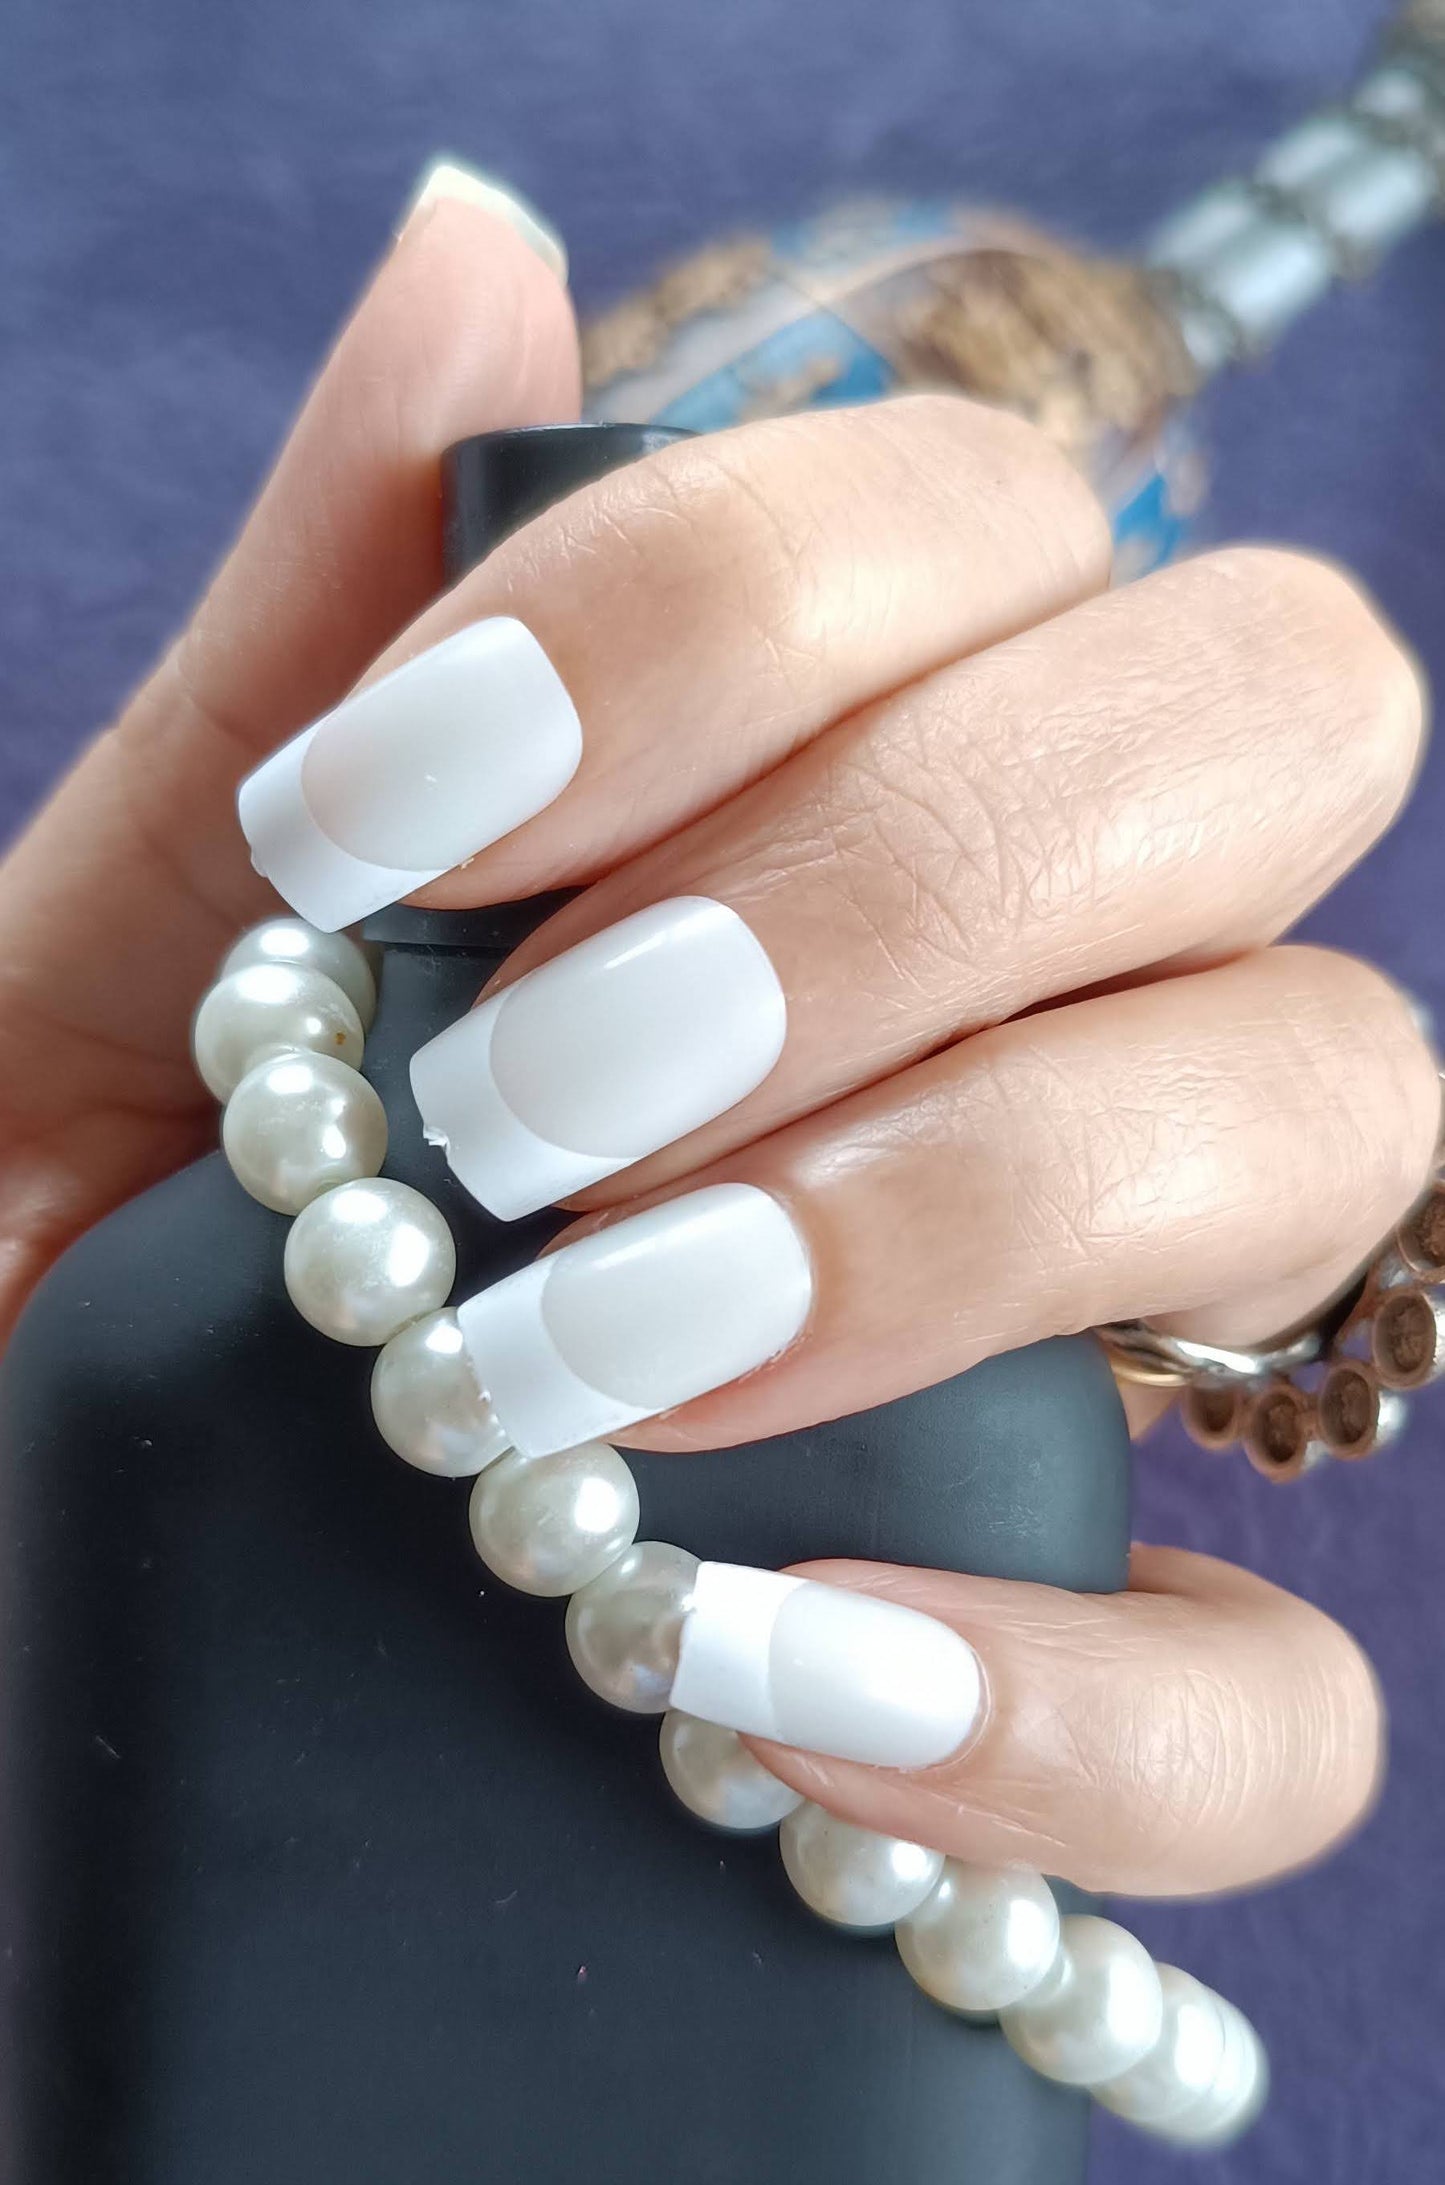 Acrylic/ Press-on Designer Nails with Glue Tabs | Artificial Nails Under 50 - Box shaped Beige French Tips